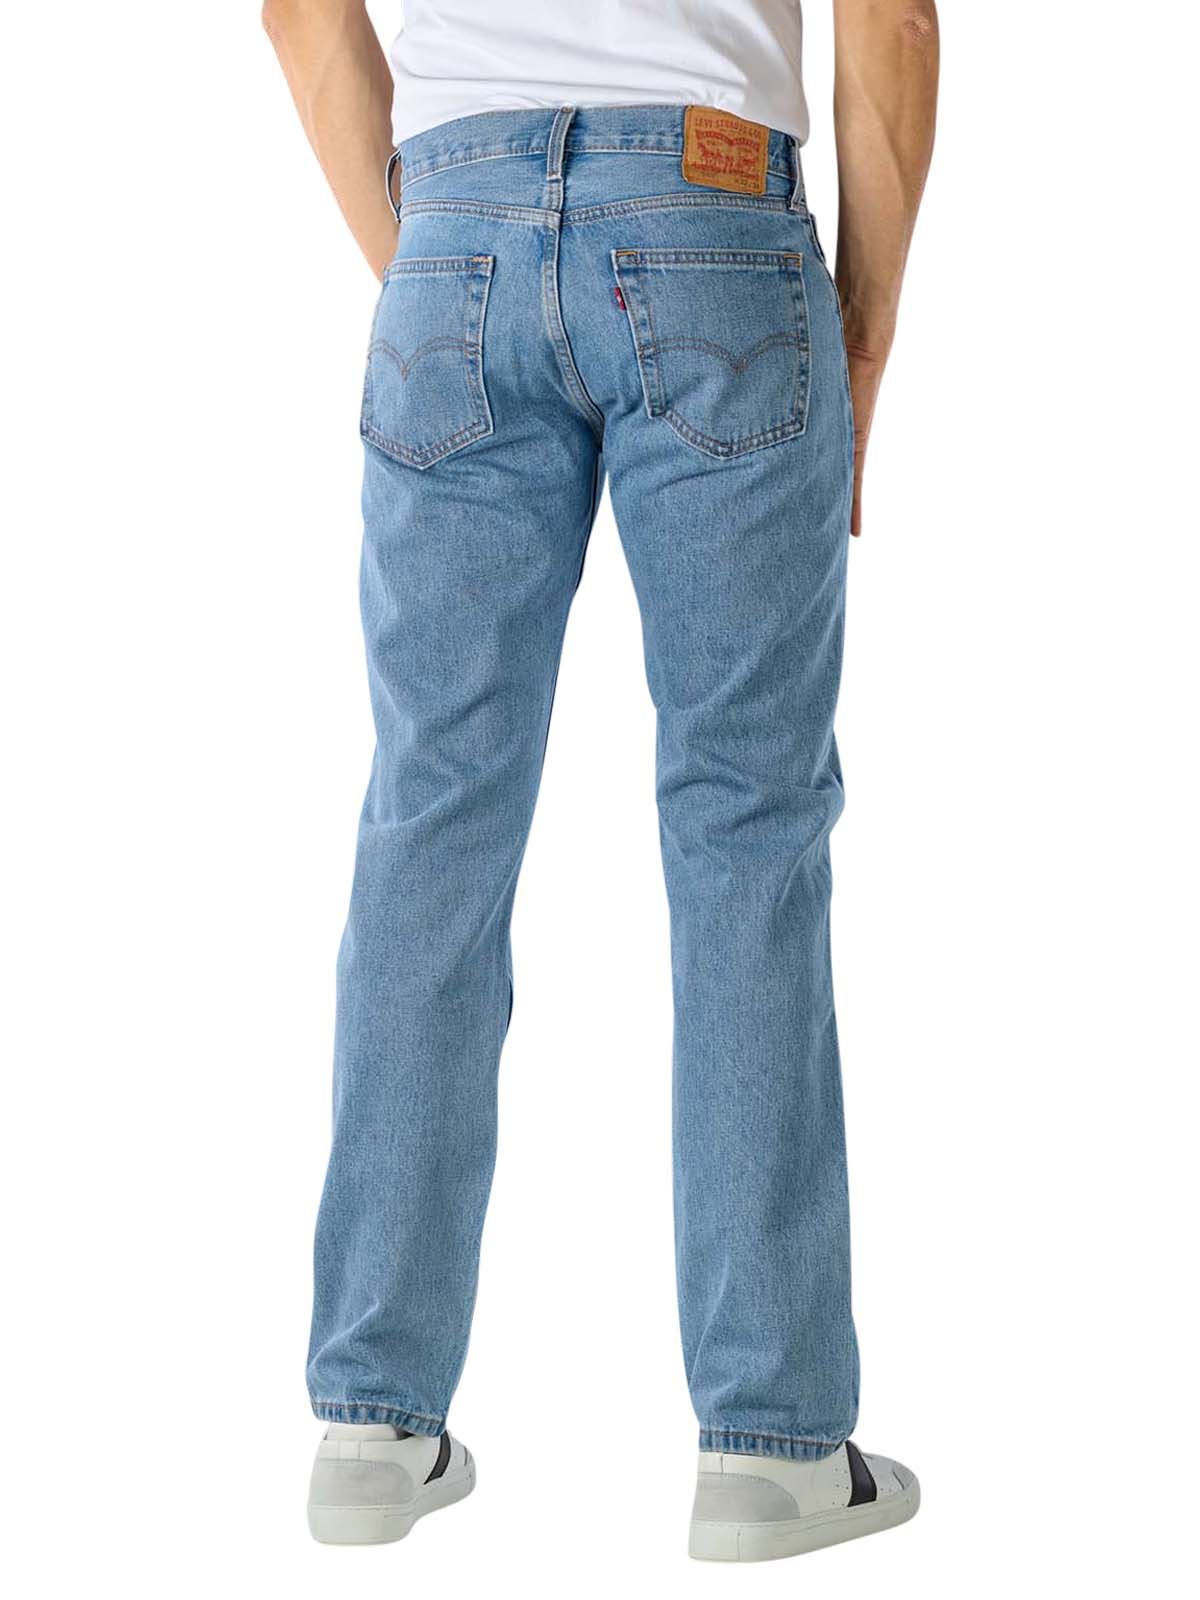 Levi's 505 Jeans light stonewash (zip) Levi's Men's Jeans | Free Shipping  on  - SIMPLY LOOK GOOD